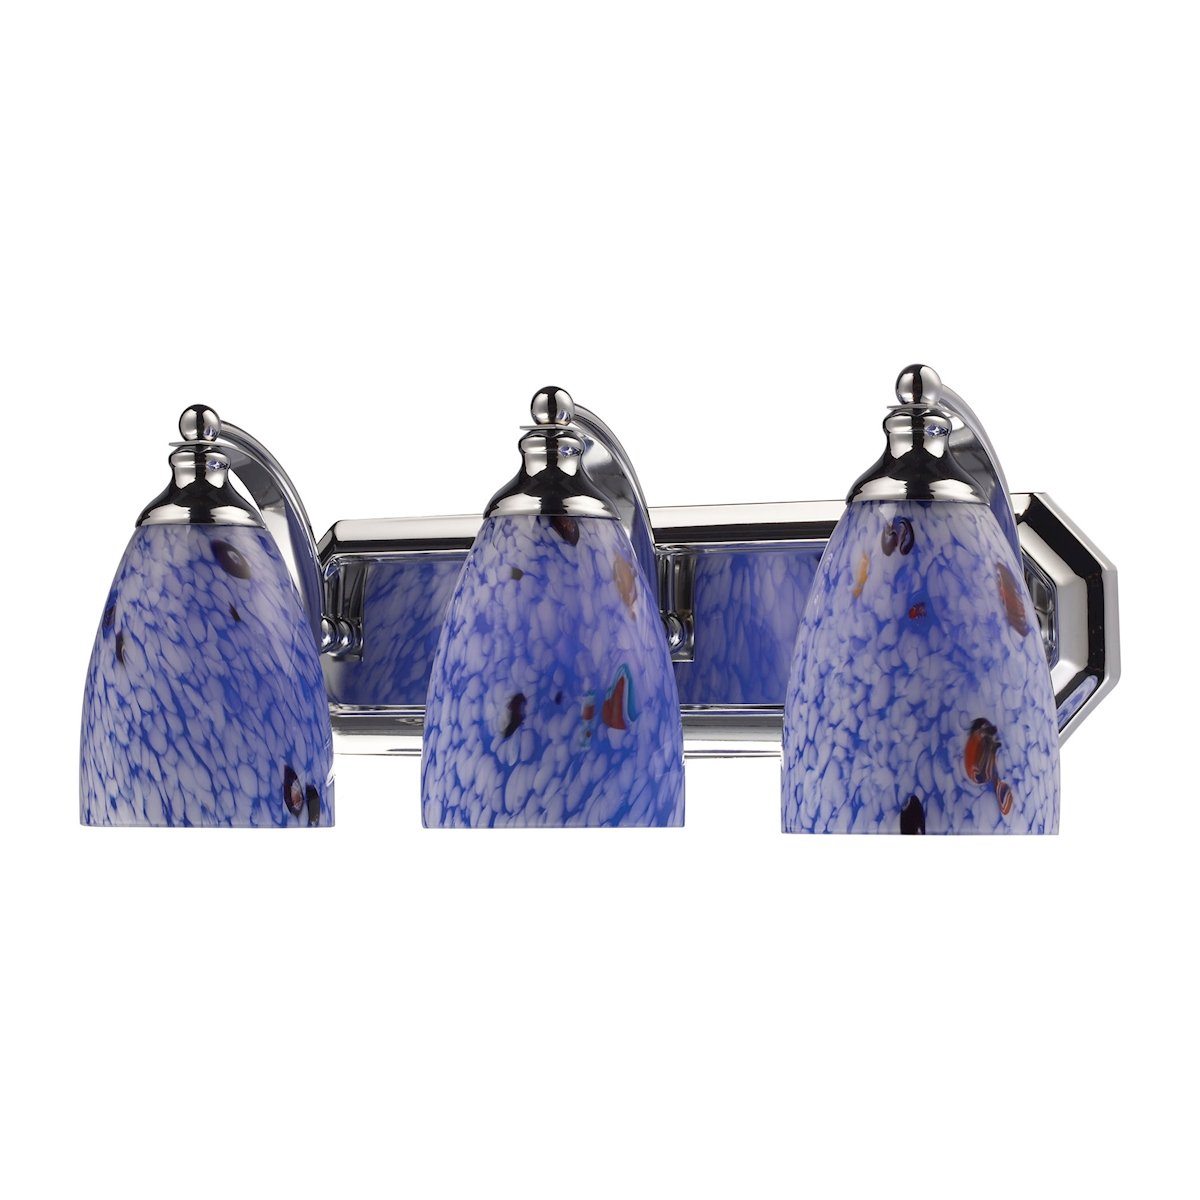 Bath And Spa 3 Light Vanity In Polished Chrome And Starburst Blue Glass Wall Elk Lighting 